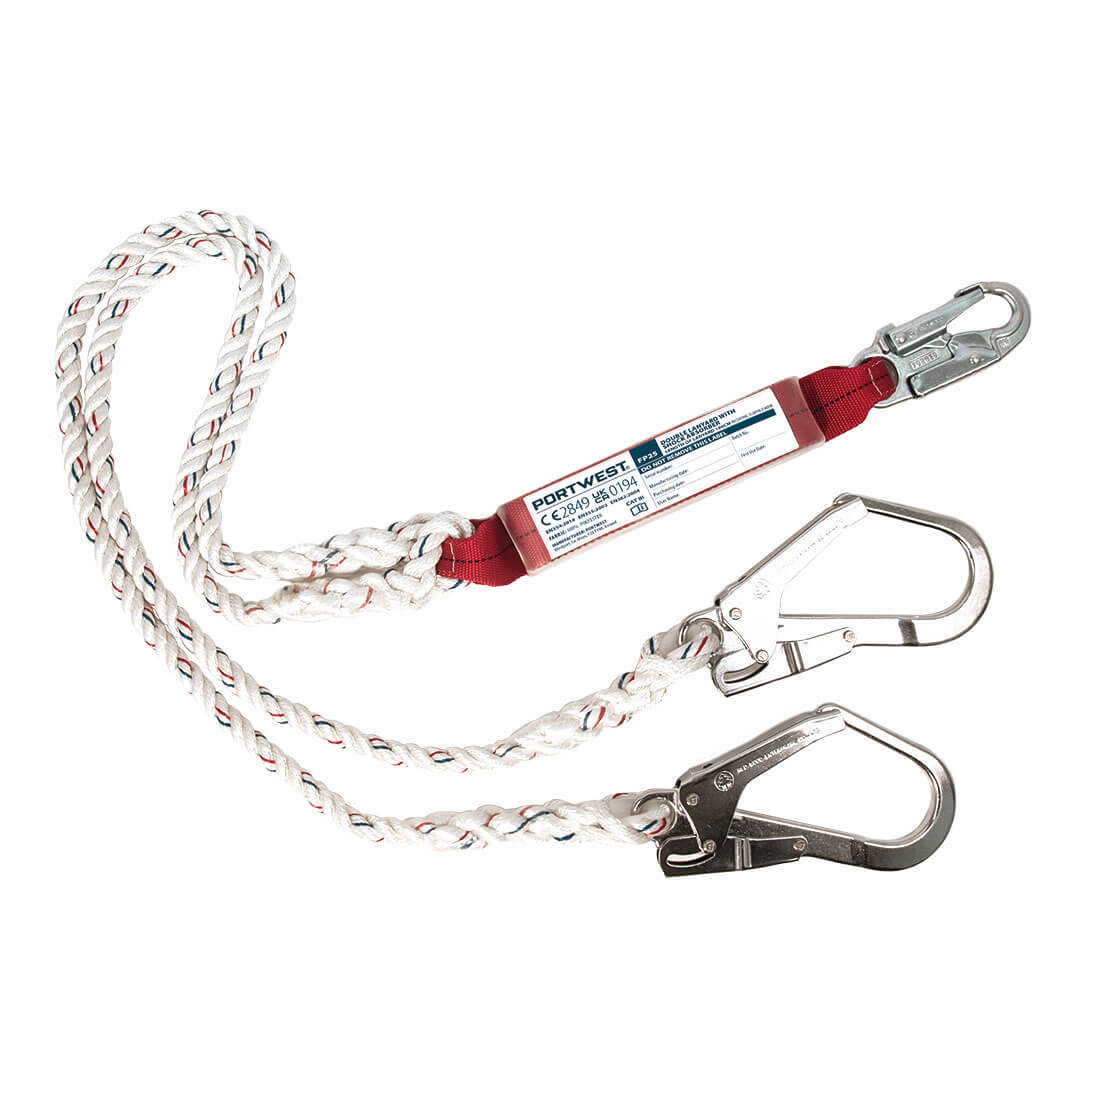 Double Lanyard With Shock Absorber -  1.8m